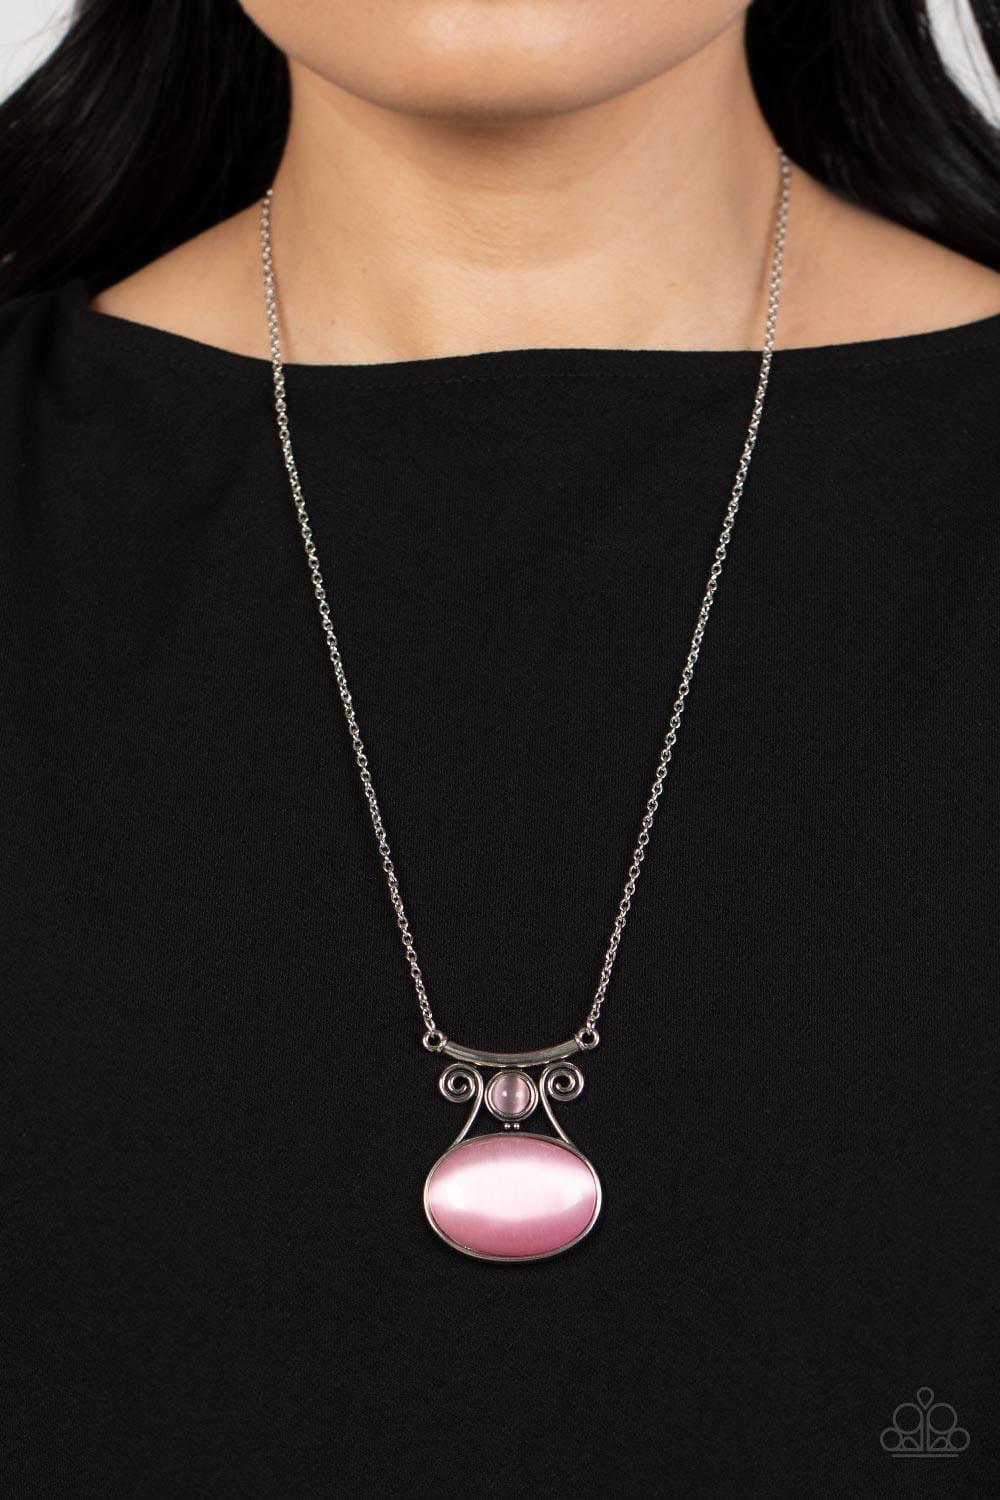 Paparazzi Accessories - One Daydream At a Time - Pink Necklace - Bling by JessieK